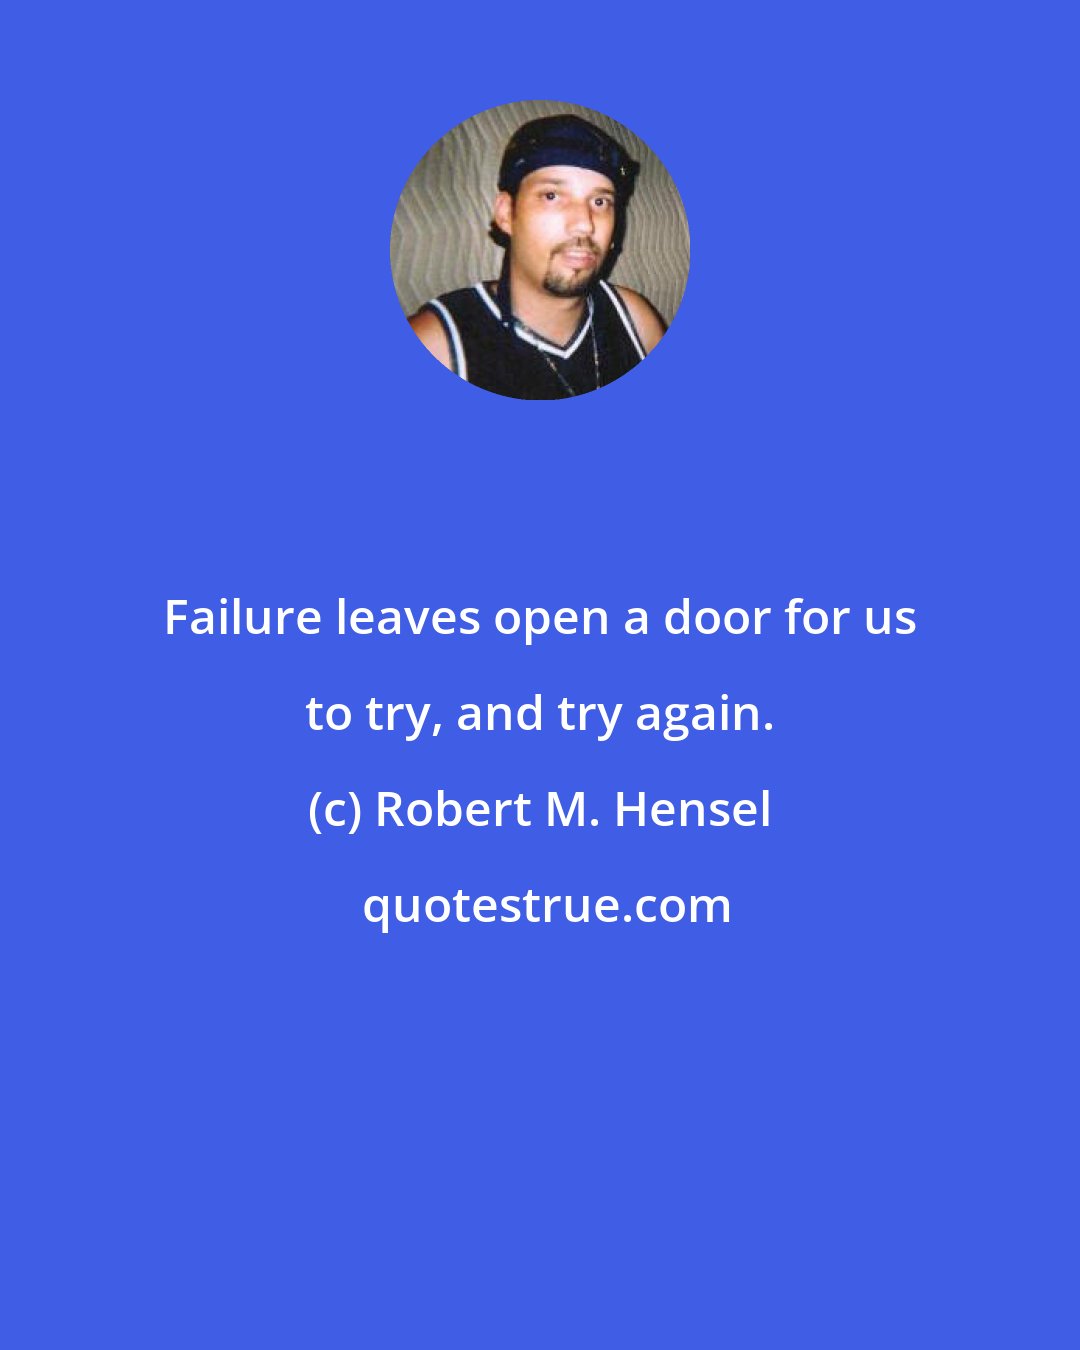 Robert M. Hensel: Failure leaves open a door for us to try, and try again.